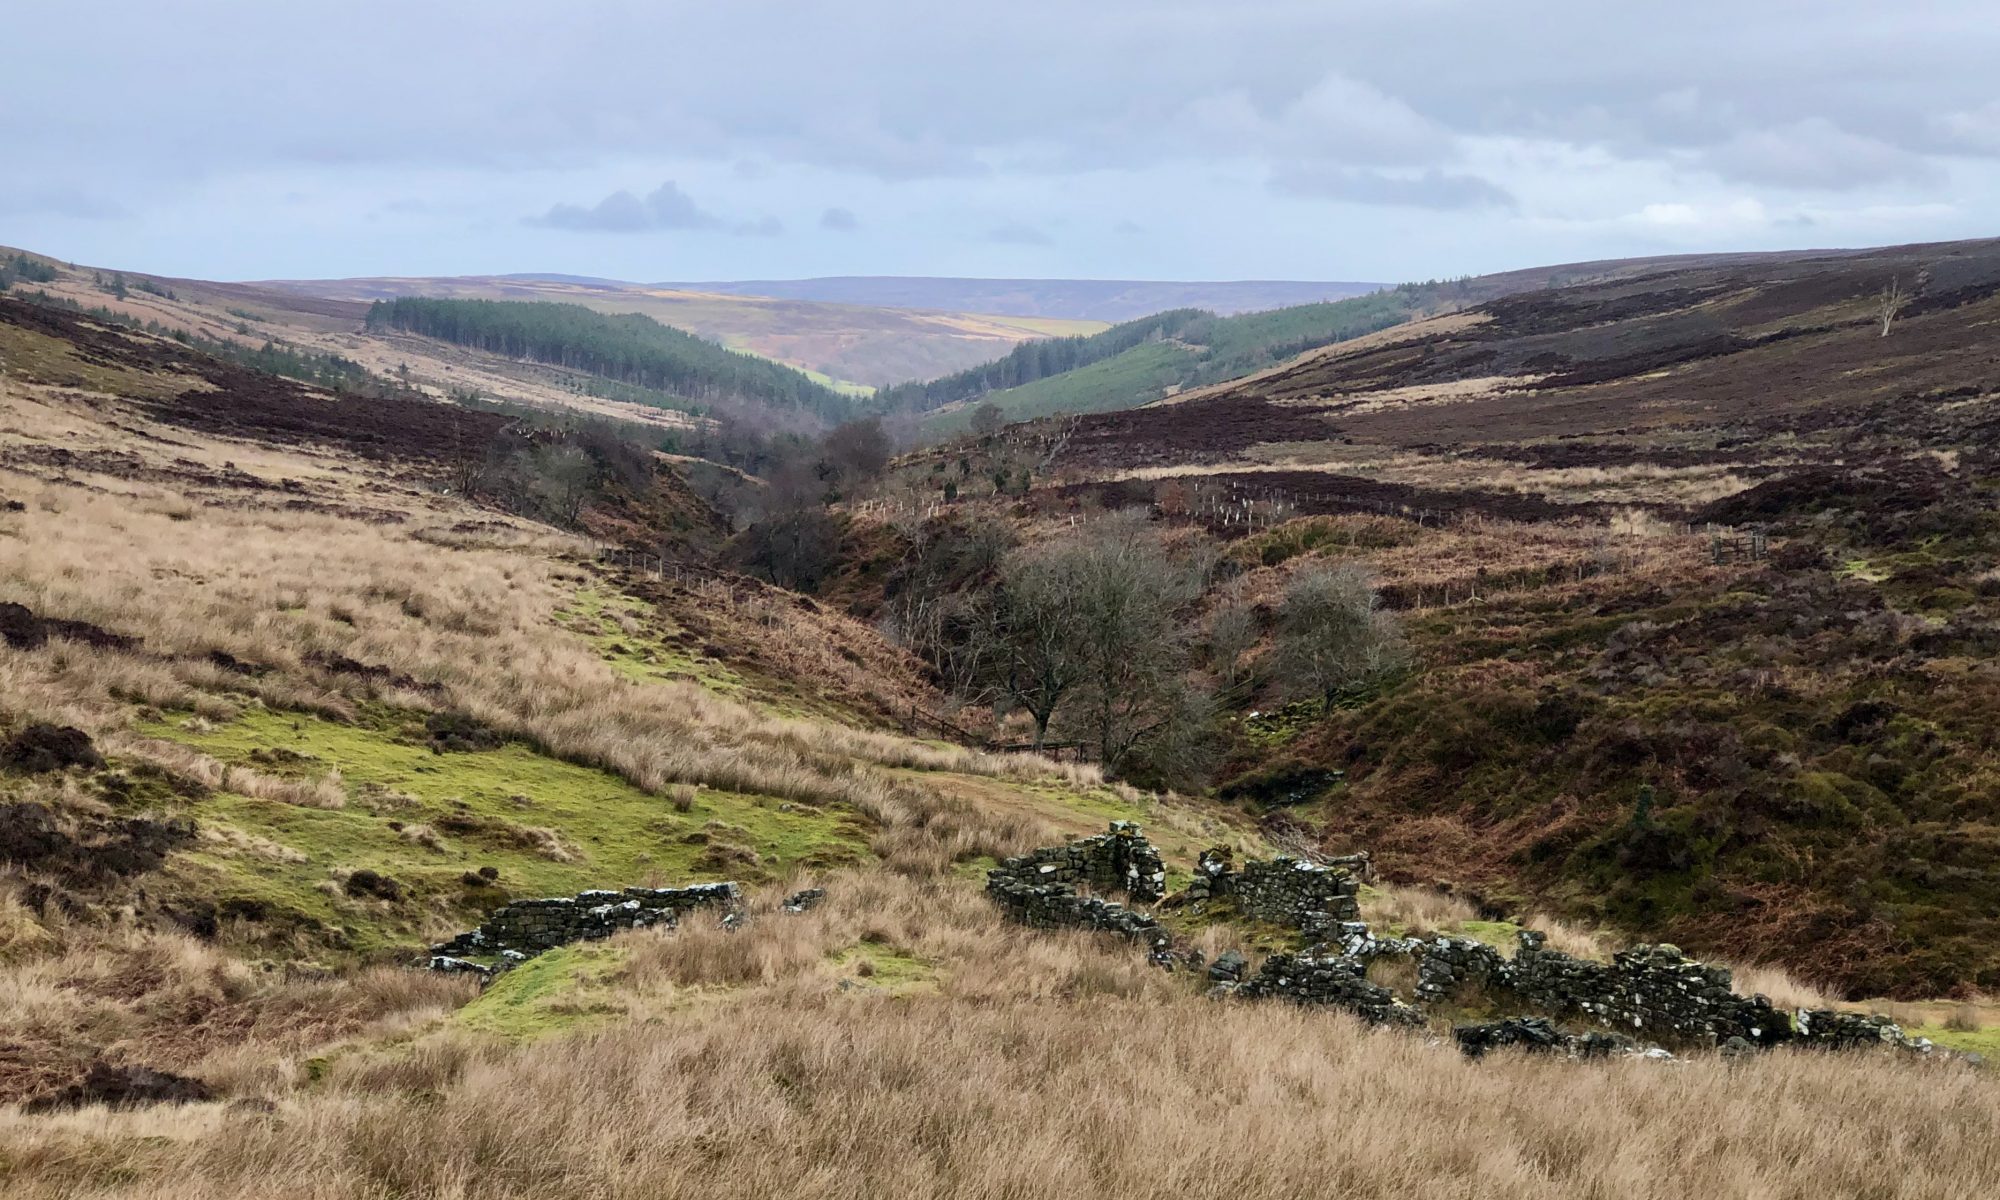 Landscape photo looking down a dale in the North York Moors. In the foreground are the ruins of colliers' cottages for the local coal mining industry.